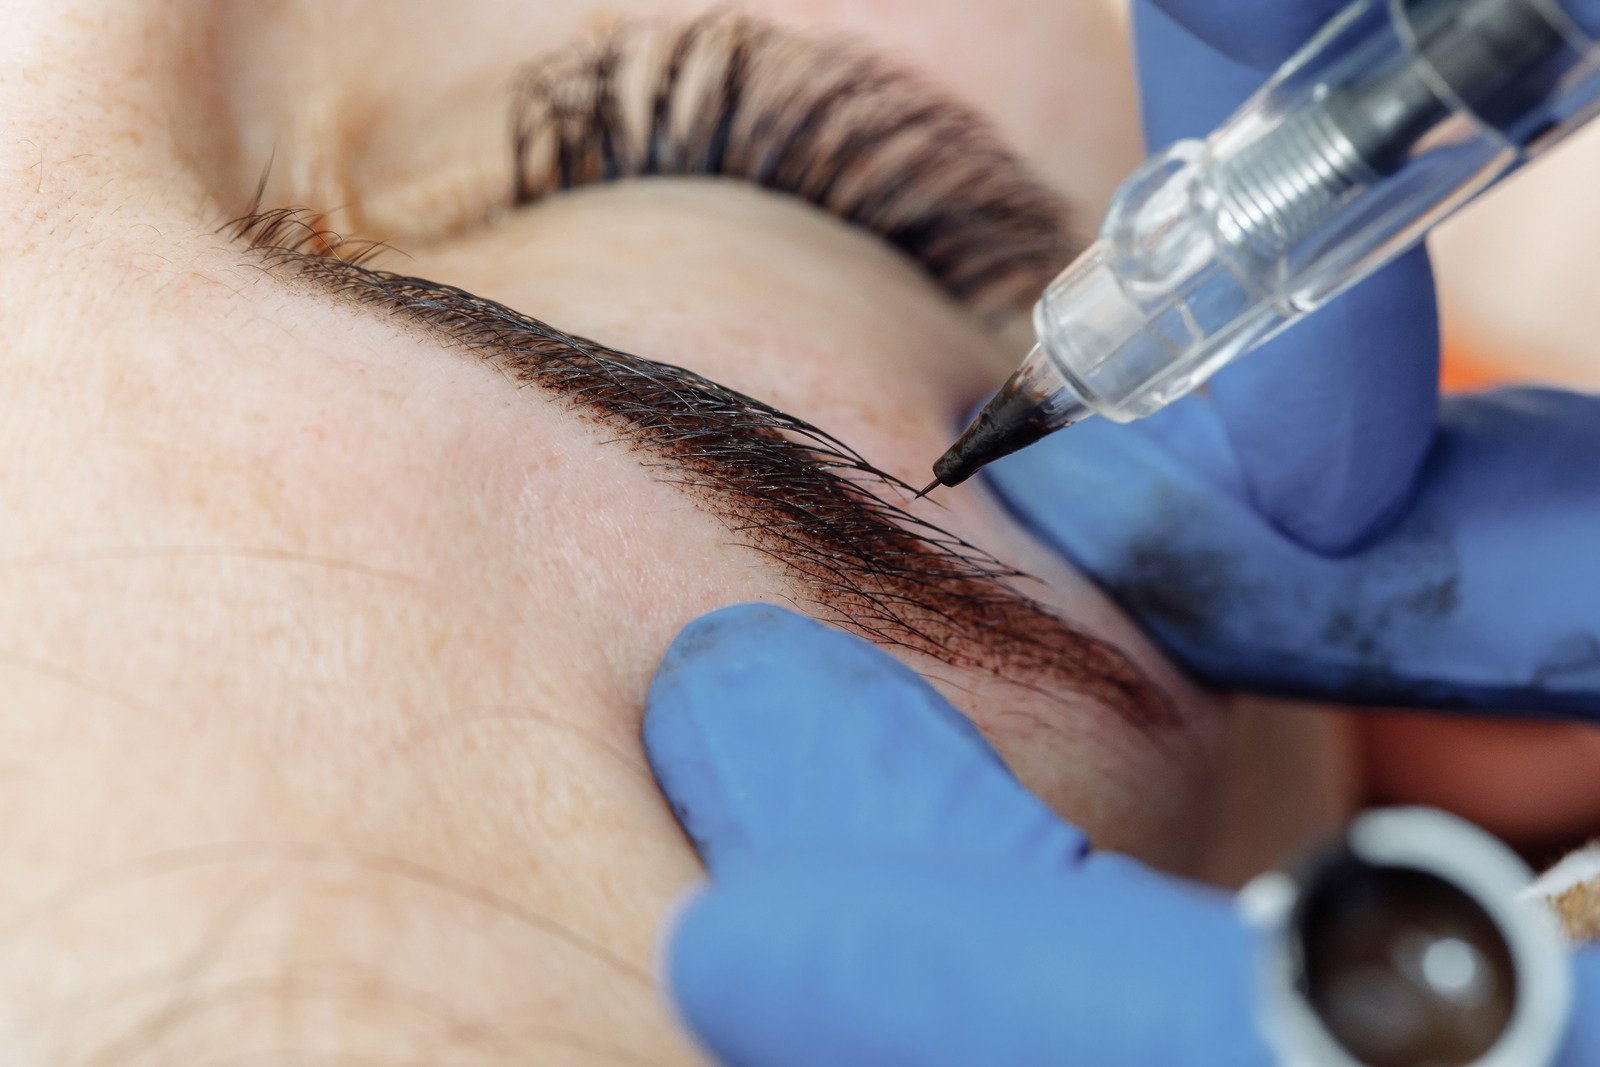 Permanent makeup, tattooing ofeyebrows. Cosmetologist applying makeup